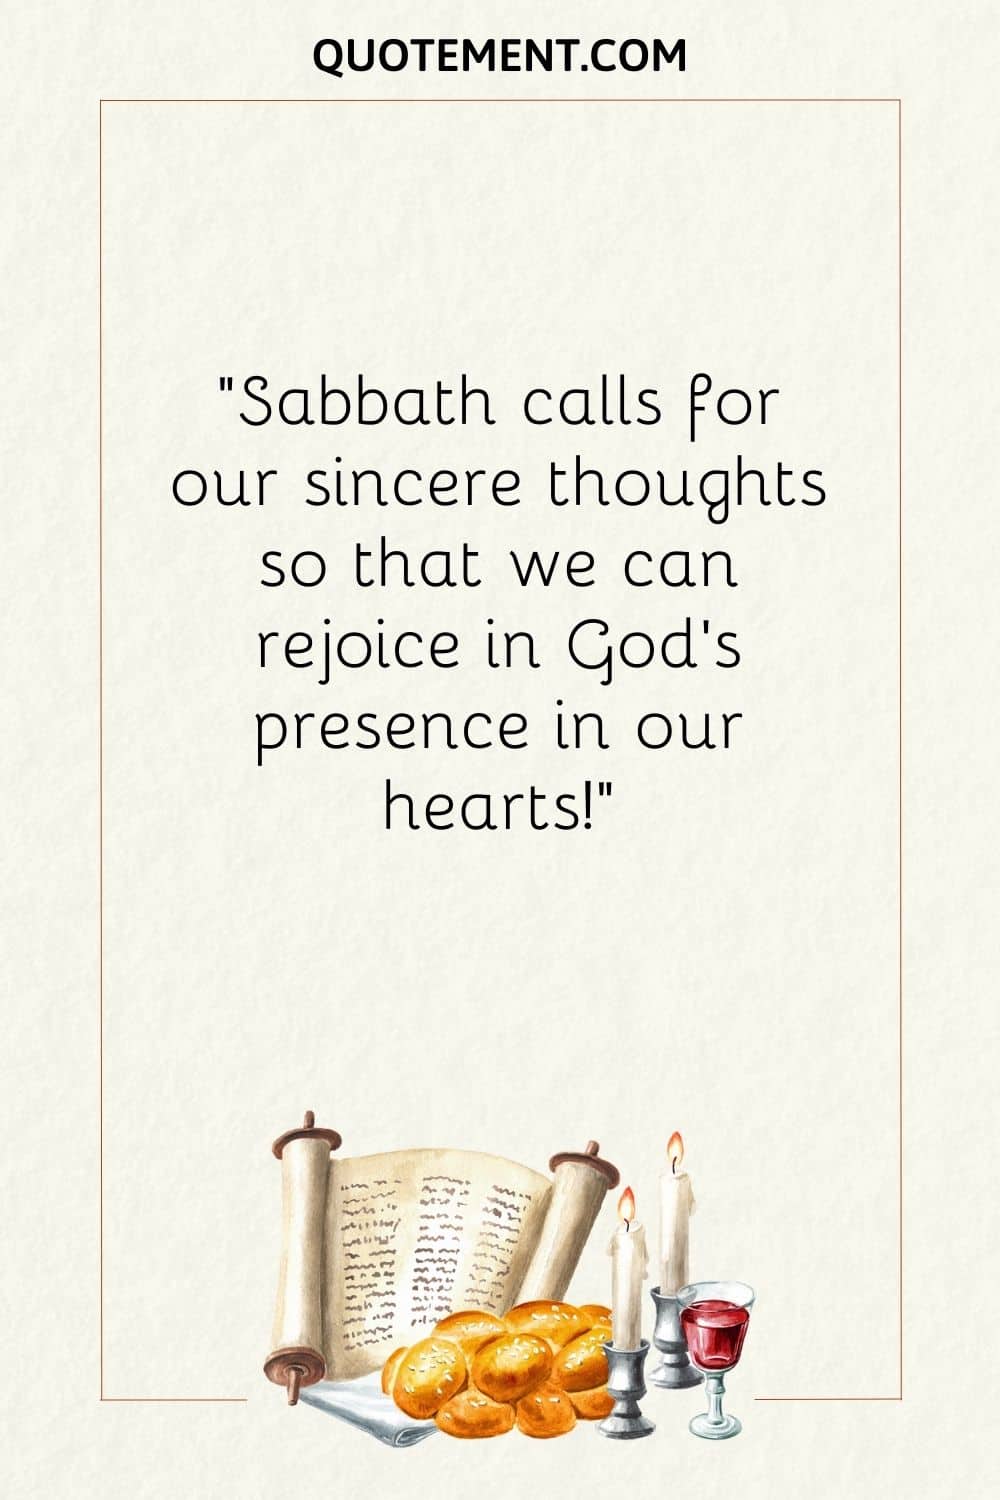 Sabbath calls for our sincere thoughts so that we can rejoice in God’s presence in our hearts